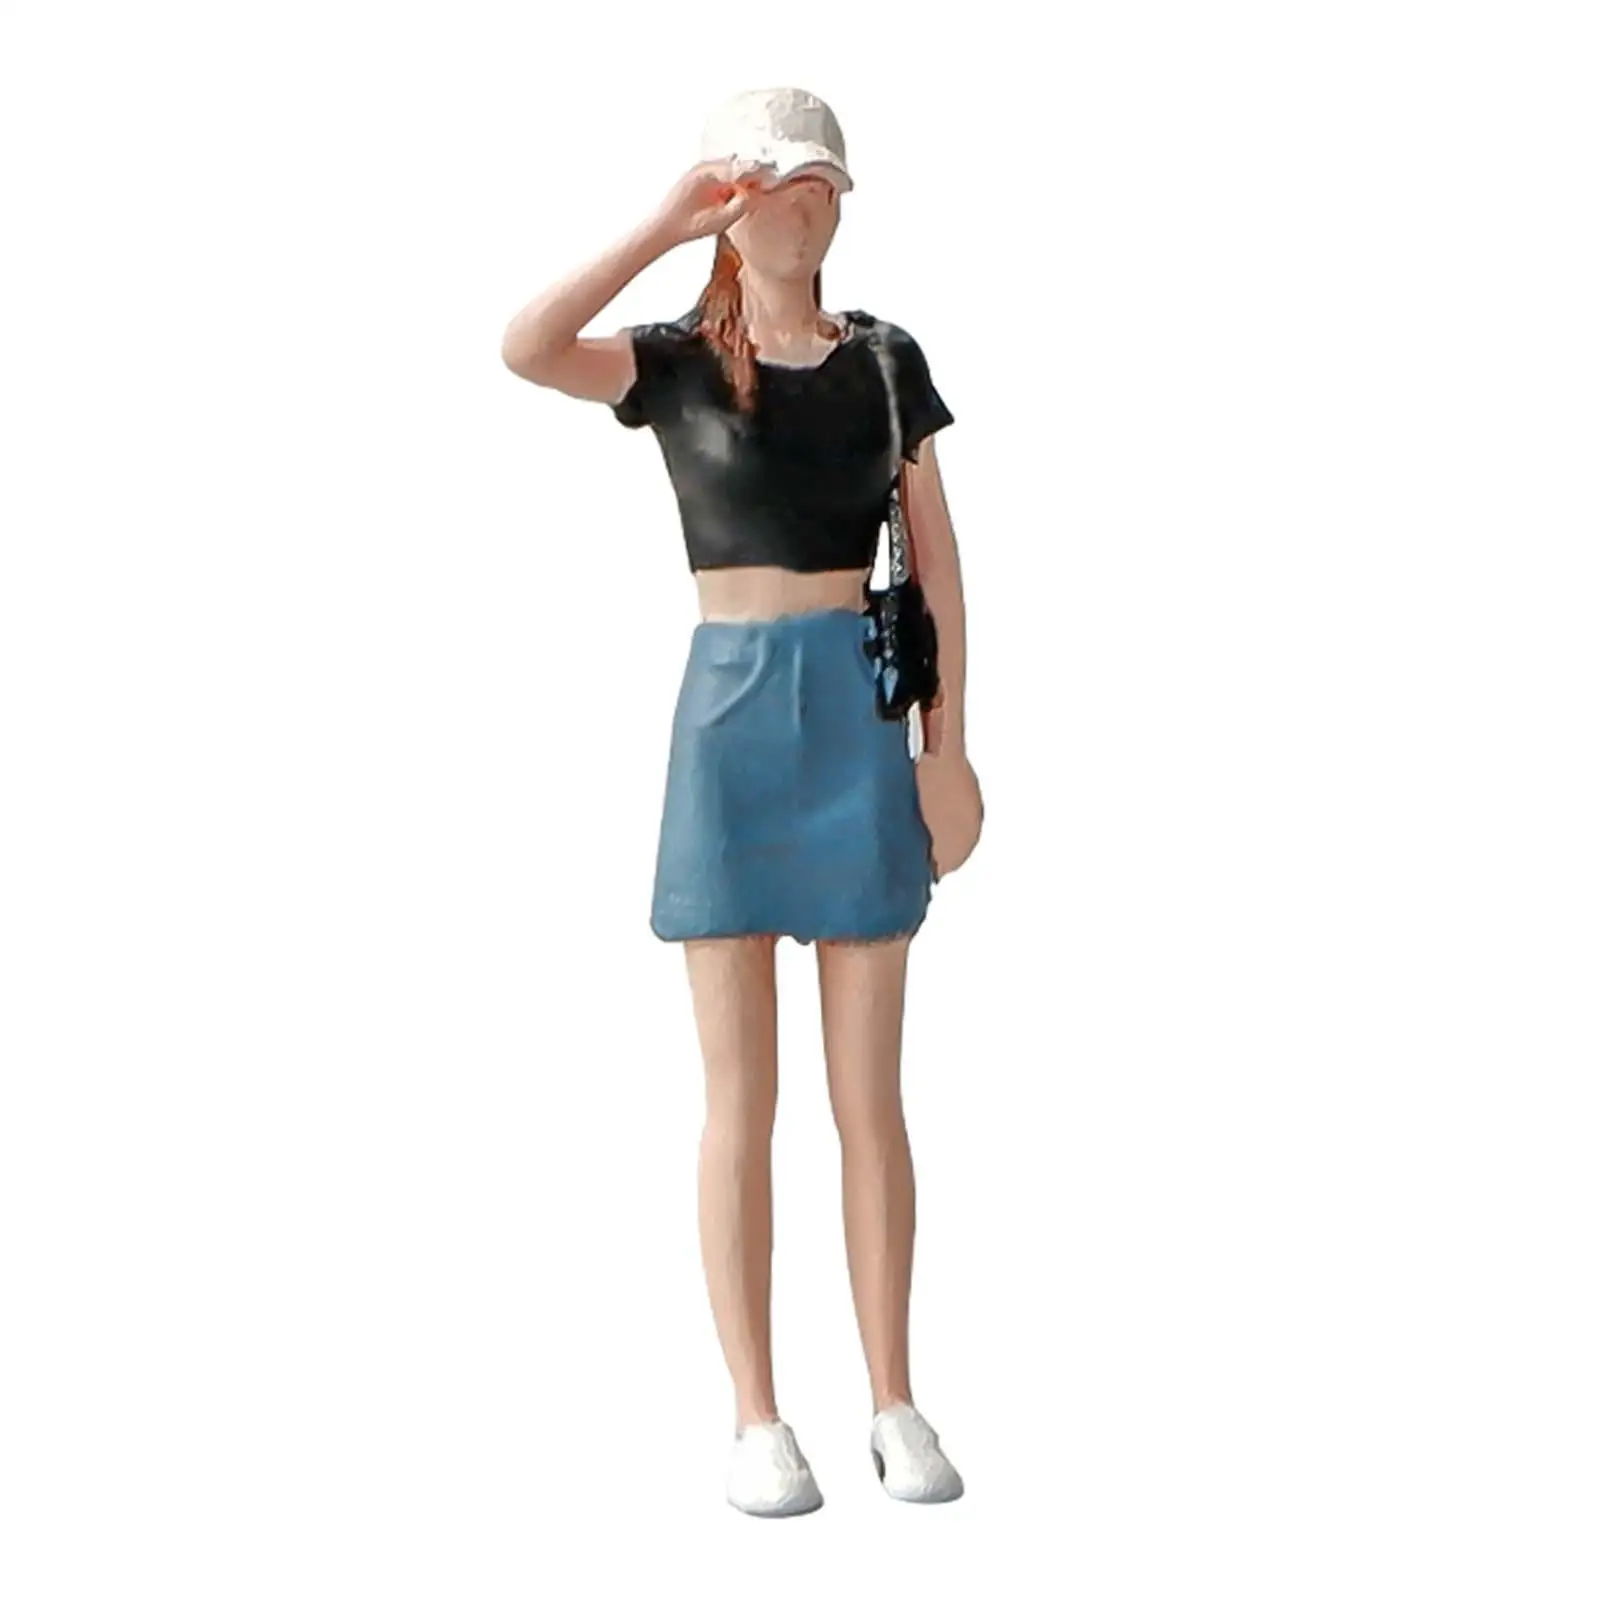 1:64 Model Figure Character Pose Scene Woman Figurine Model Mini Doll for Photography Railways Building Kits Sand Table Layout